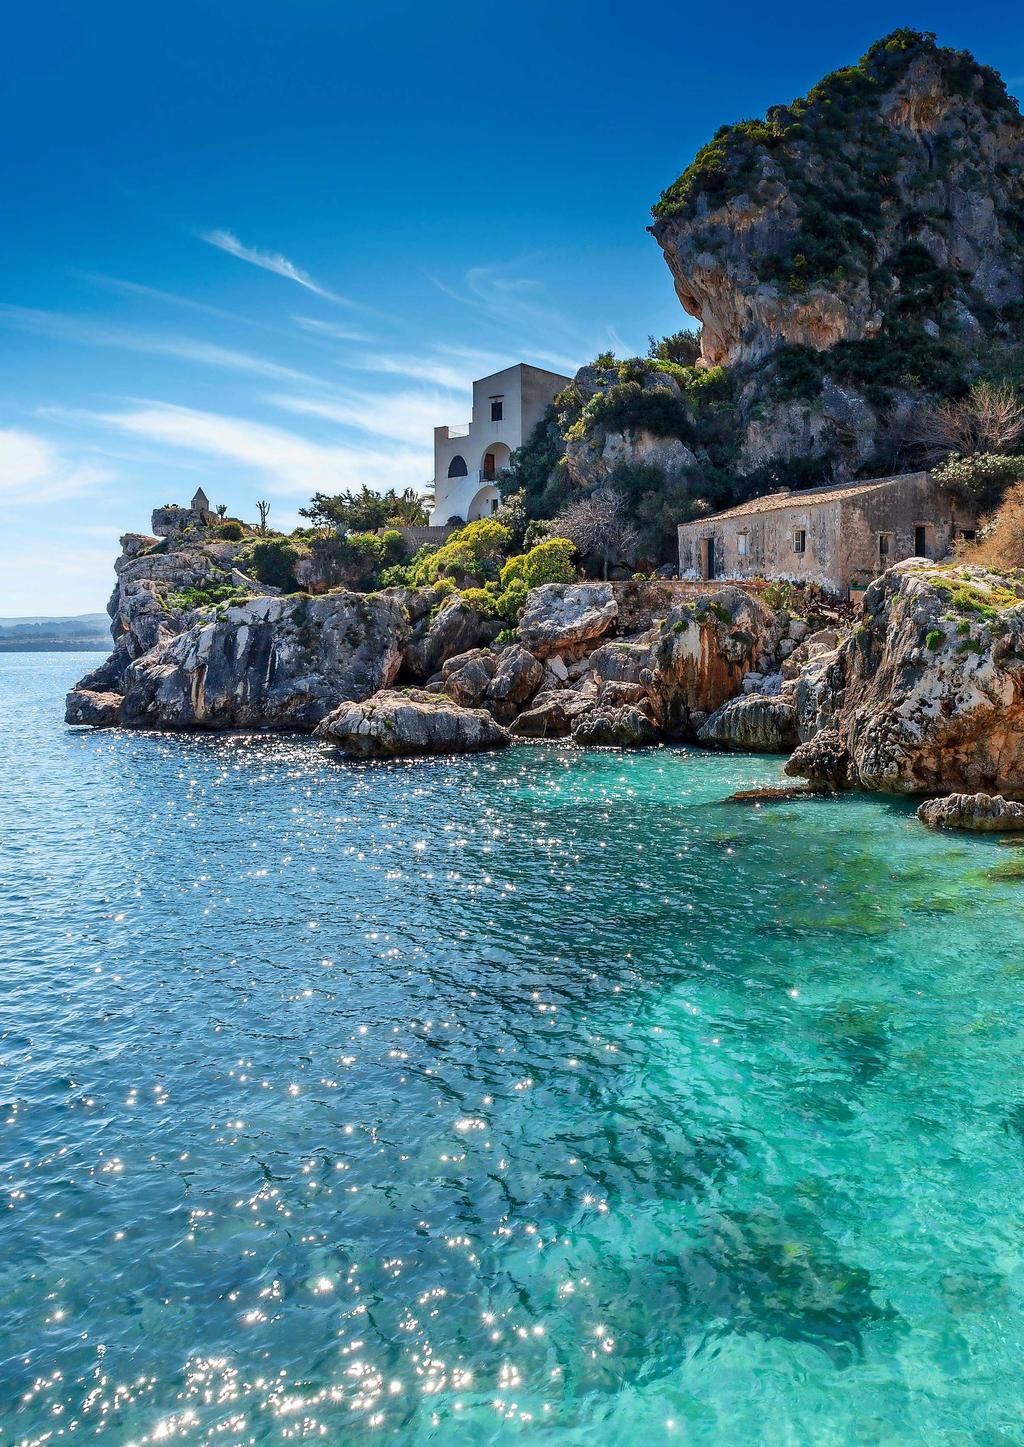 Italy is the ideal destination for a beach vacation: from the North to the South, stretches of sandy beaches alternate with jagged shorelines and sea.